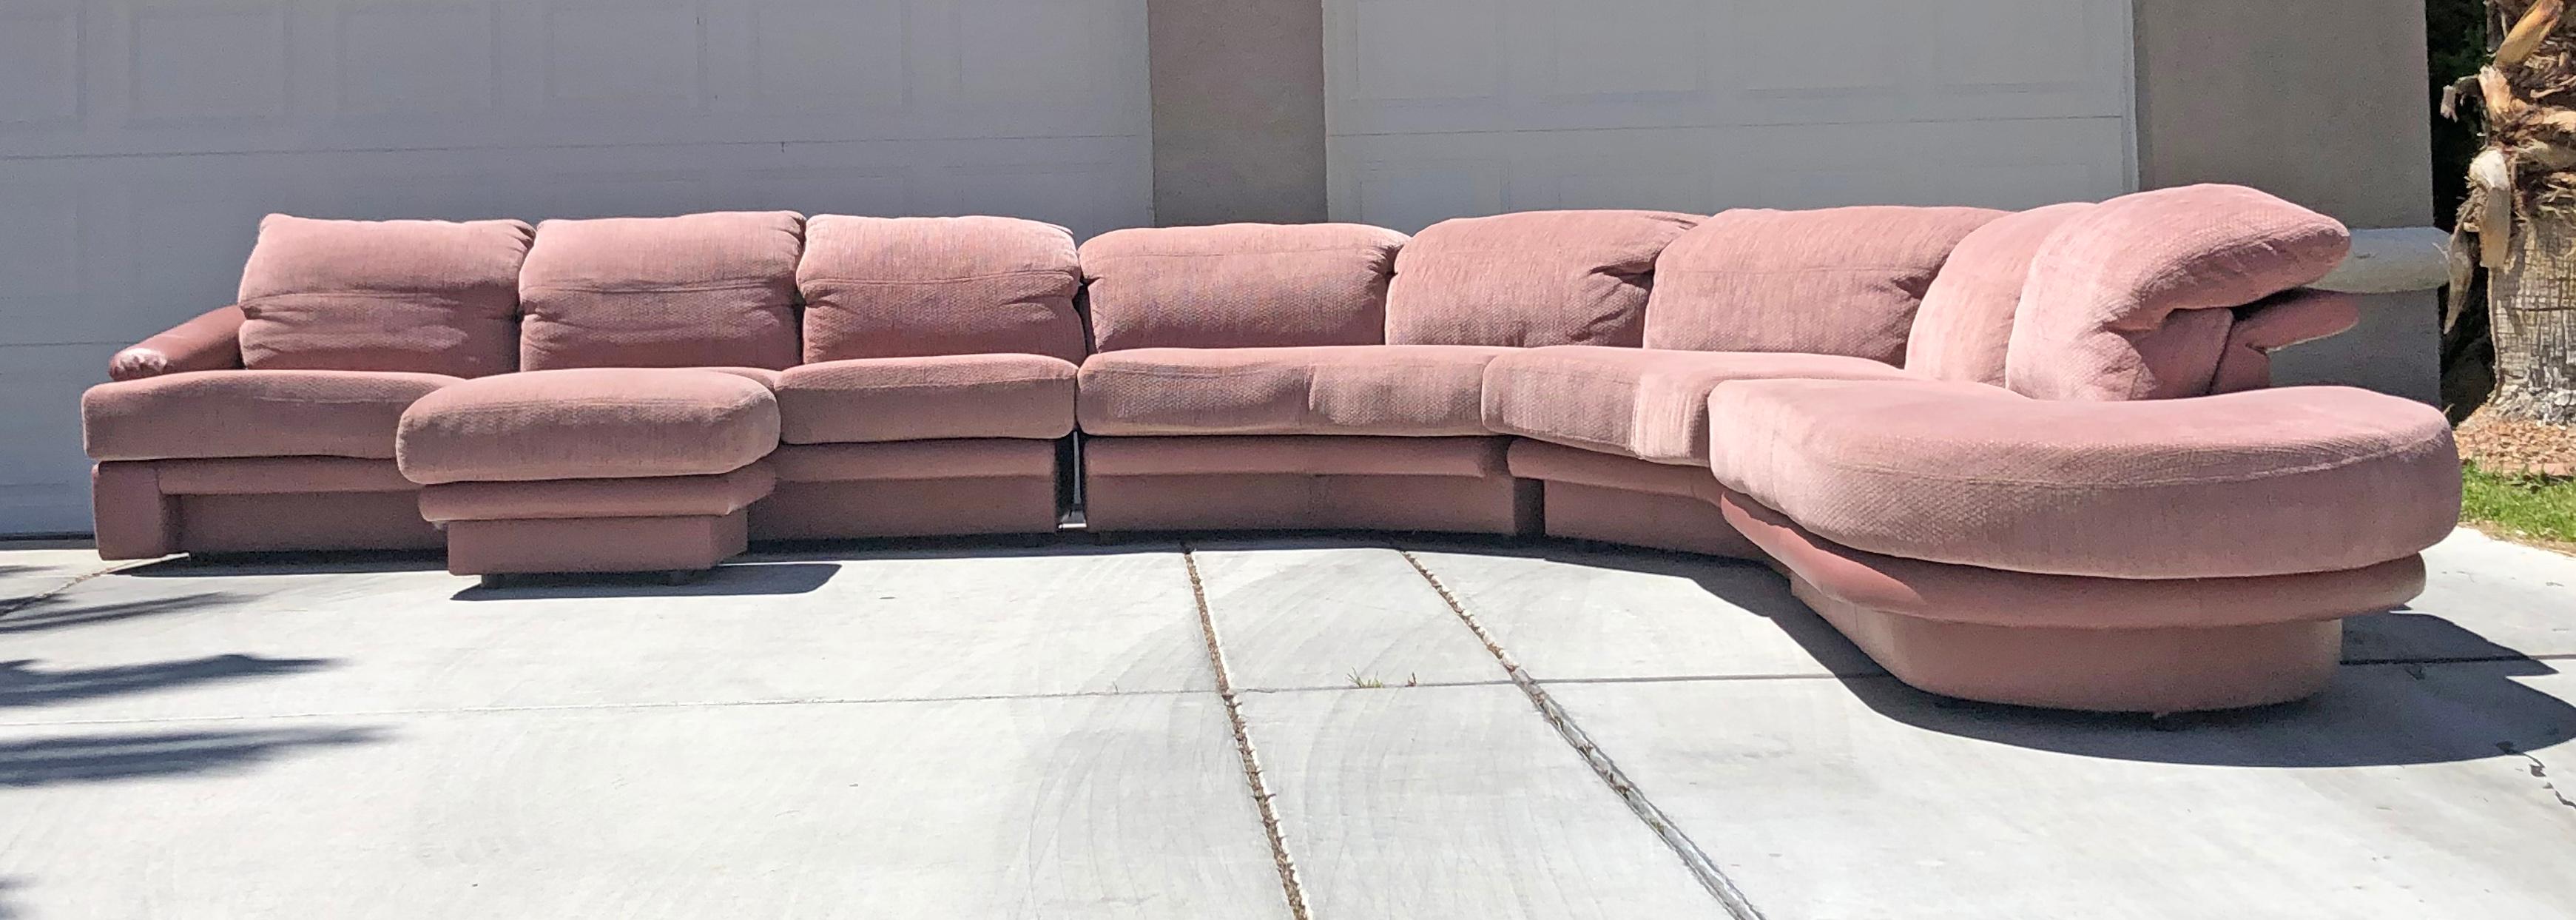 An absolutely stunning design by Vladimir Kagan for Preview, this millennial pink, or blush colored sectional is just as comfortable as it is easy on the eyes. Designed and manufactured in the 80's, the sofa is upholstered in both leather and a